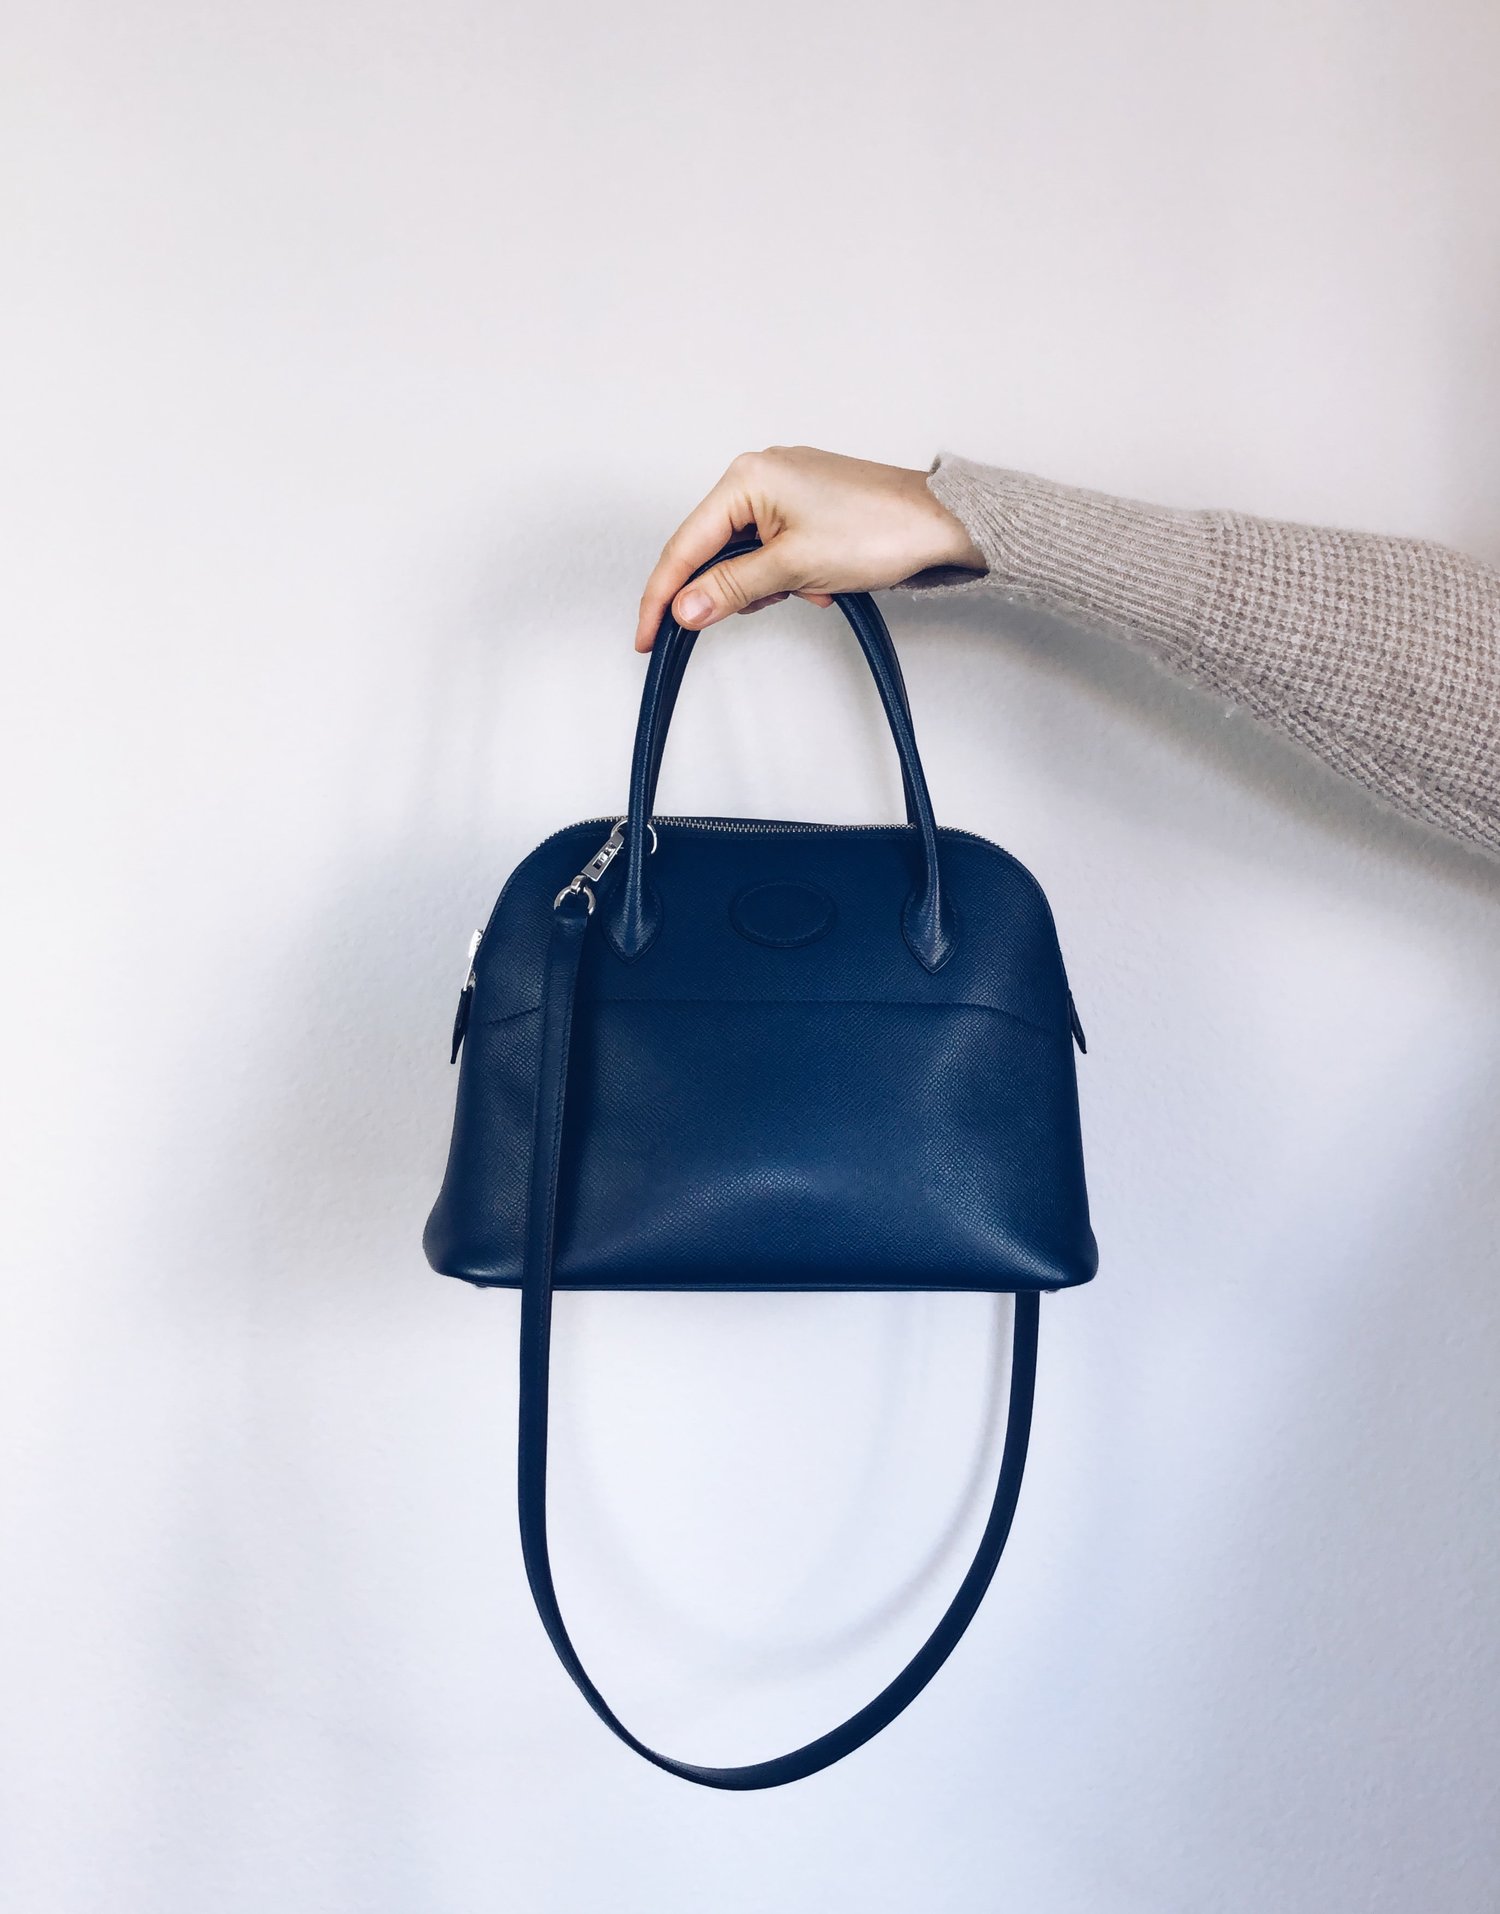 Celine Tabou Bag Review — Fairly Curated